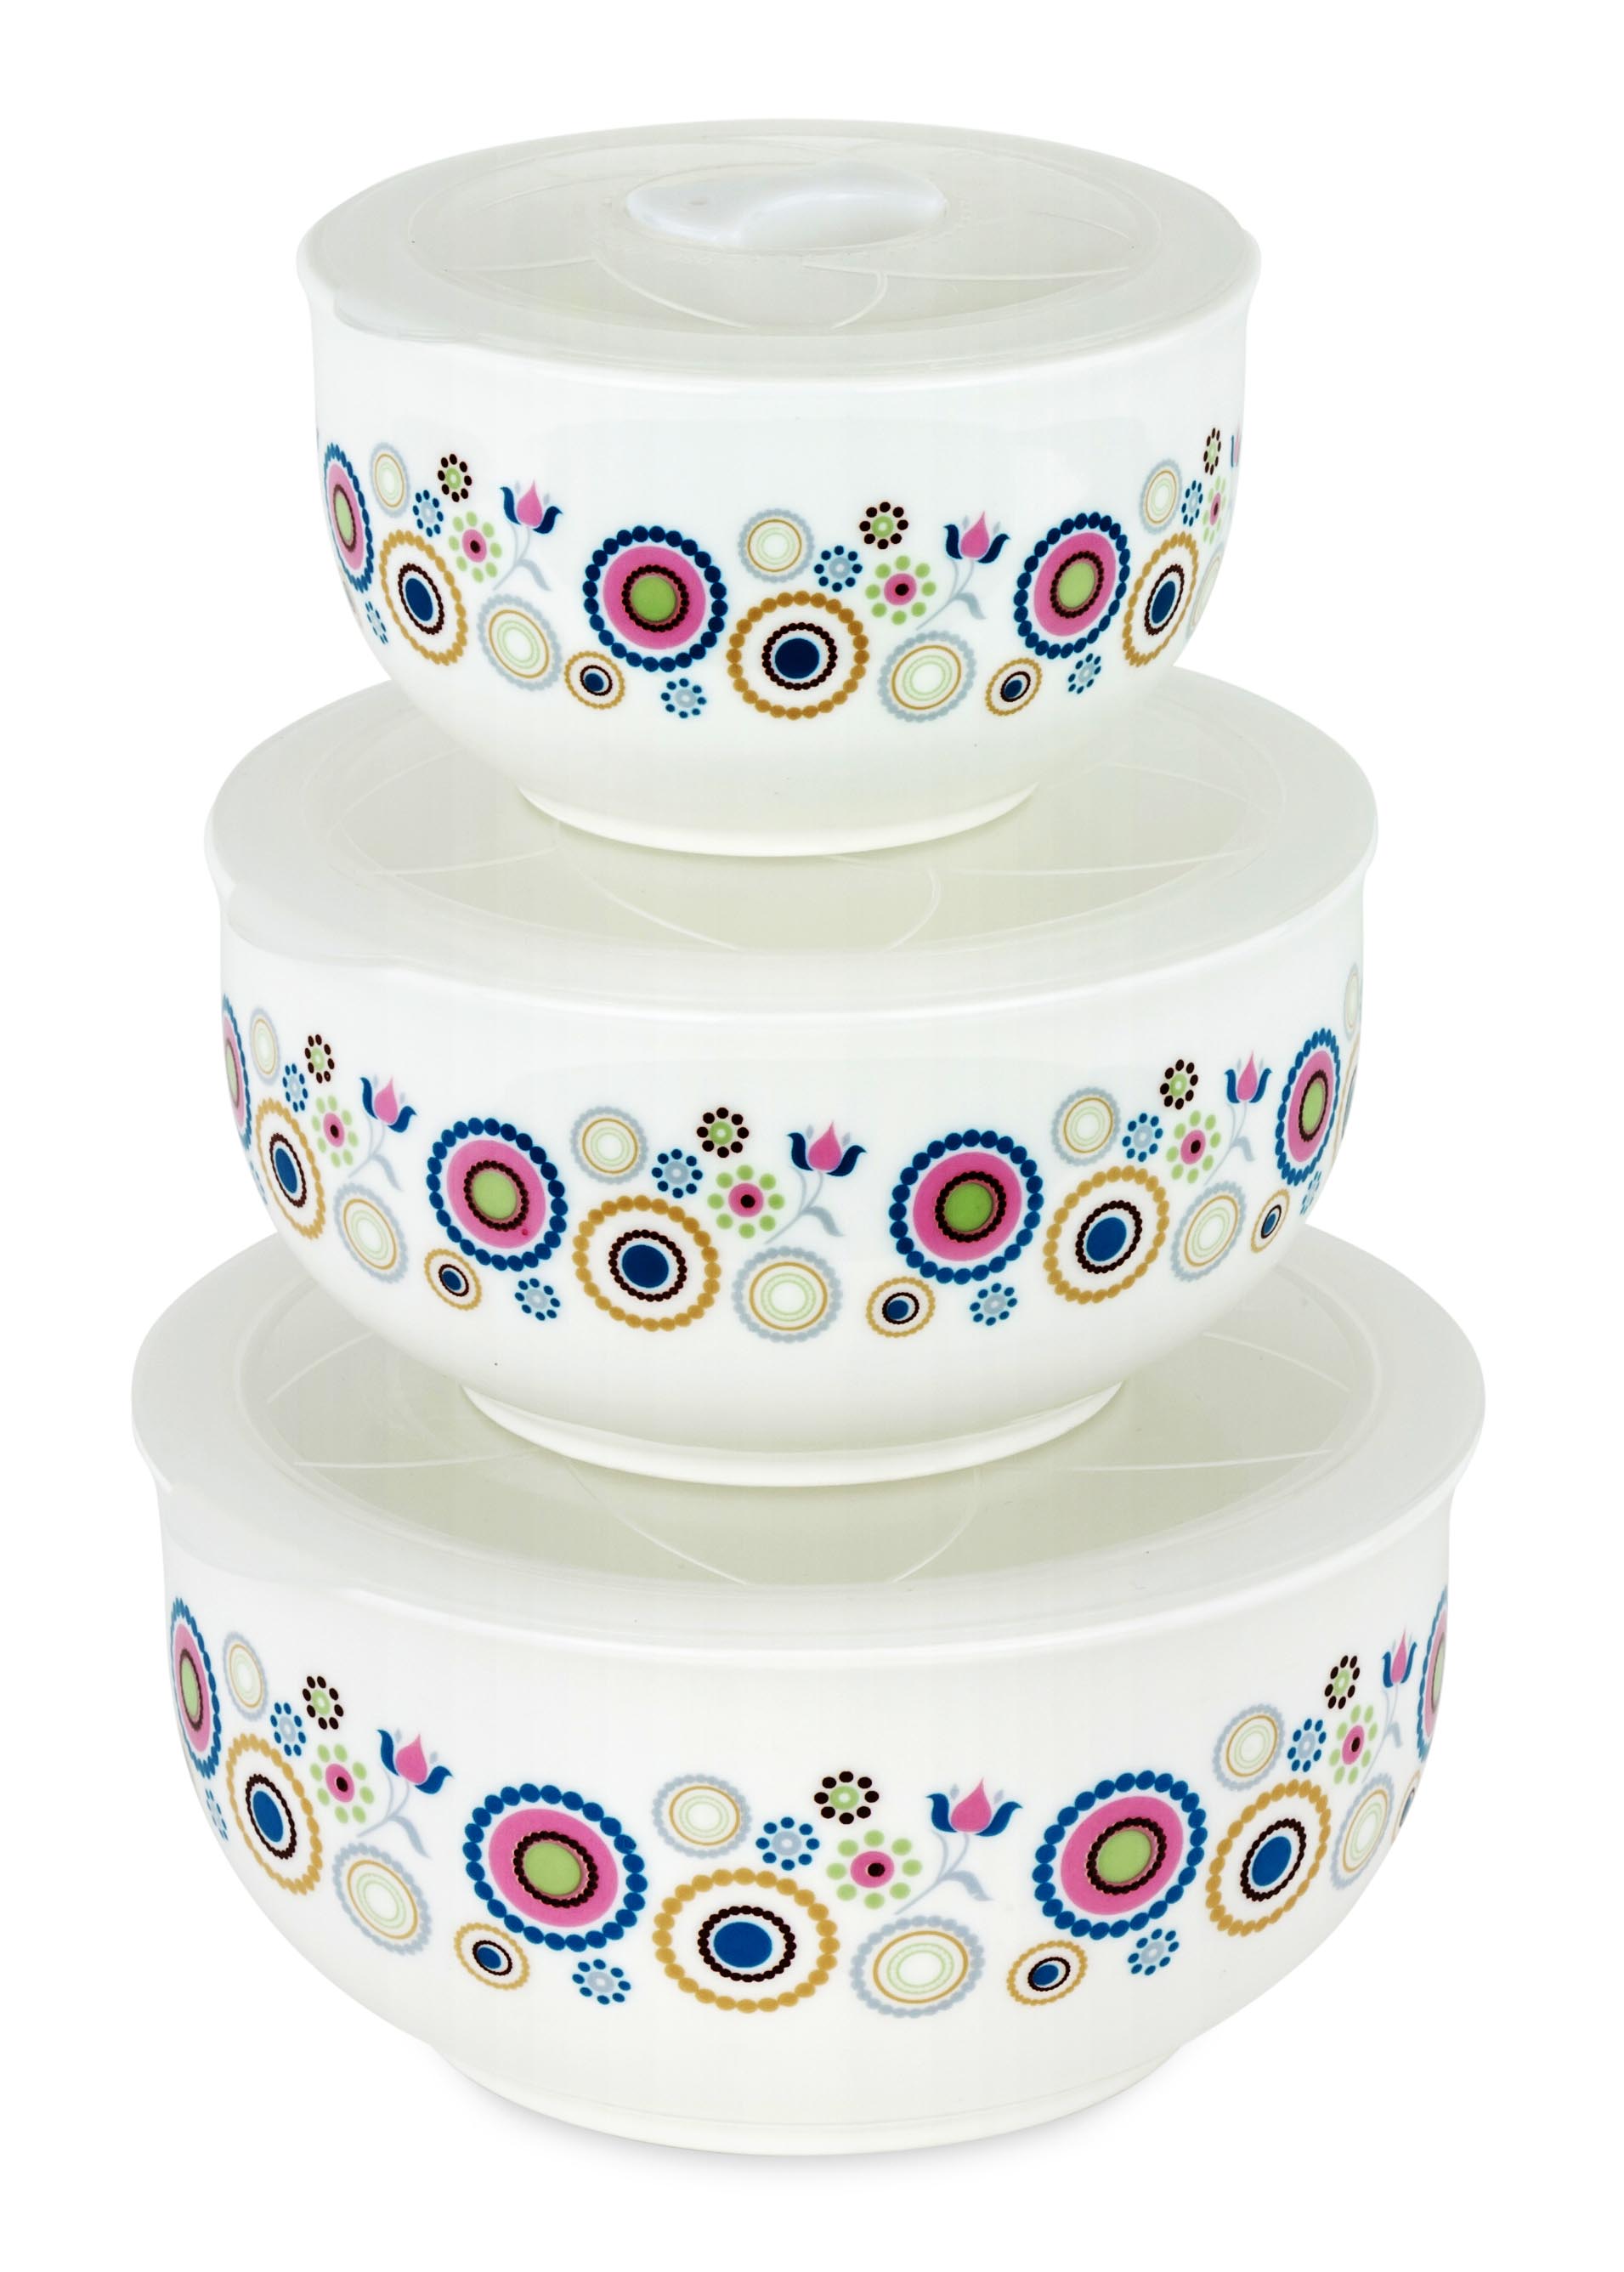 6 Pc Ceramic Bowls Set - Food Storage Containers w/ Vented Lids (Floral